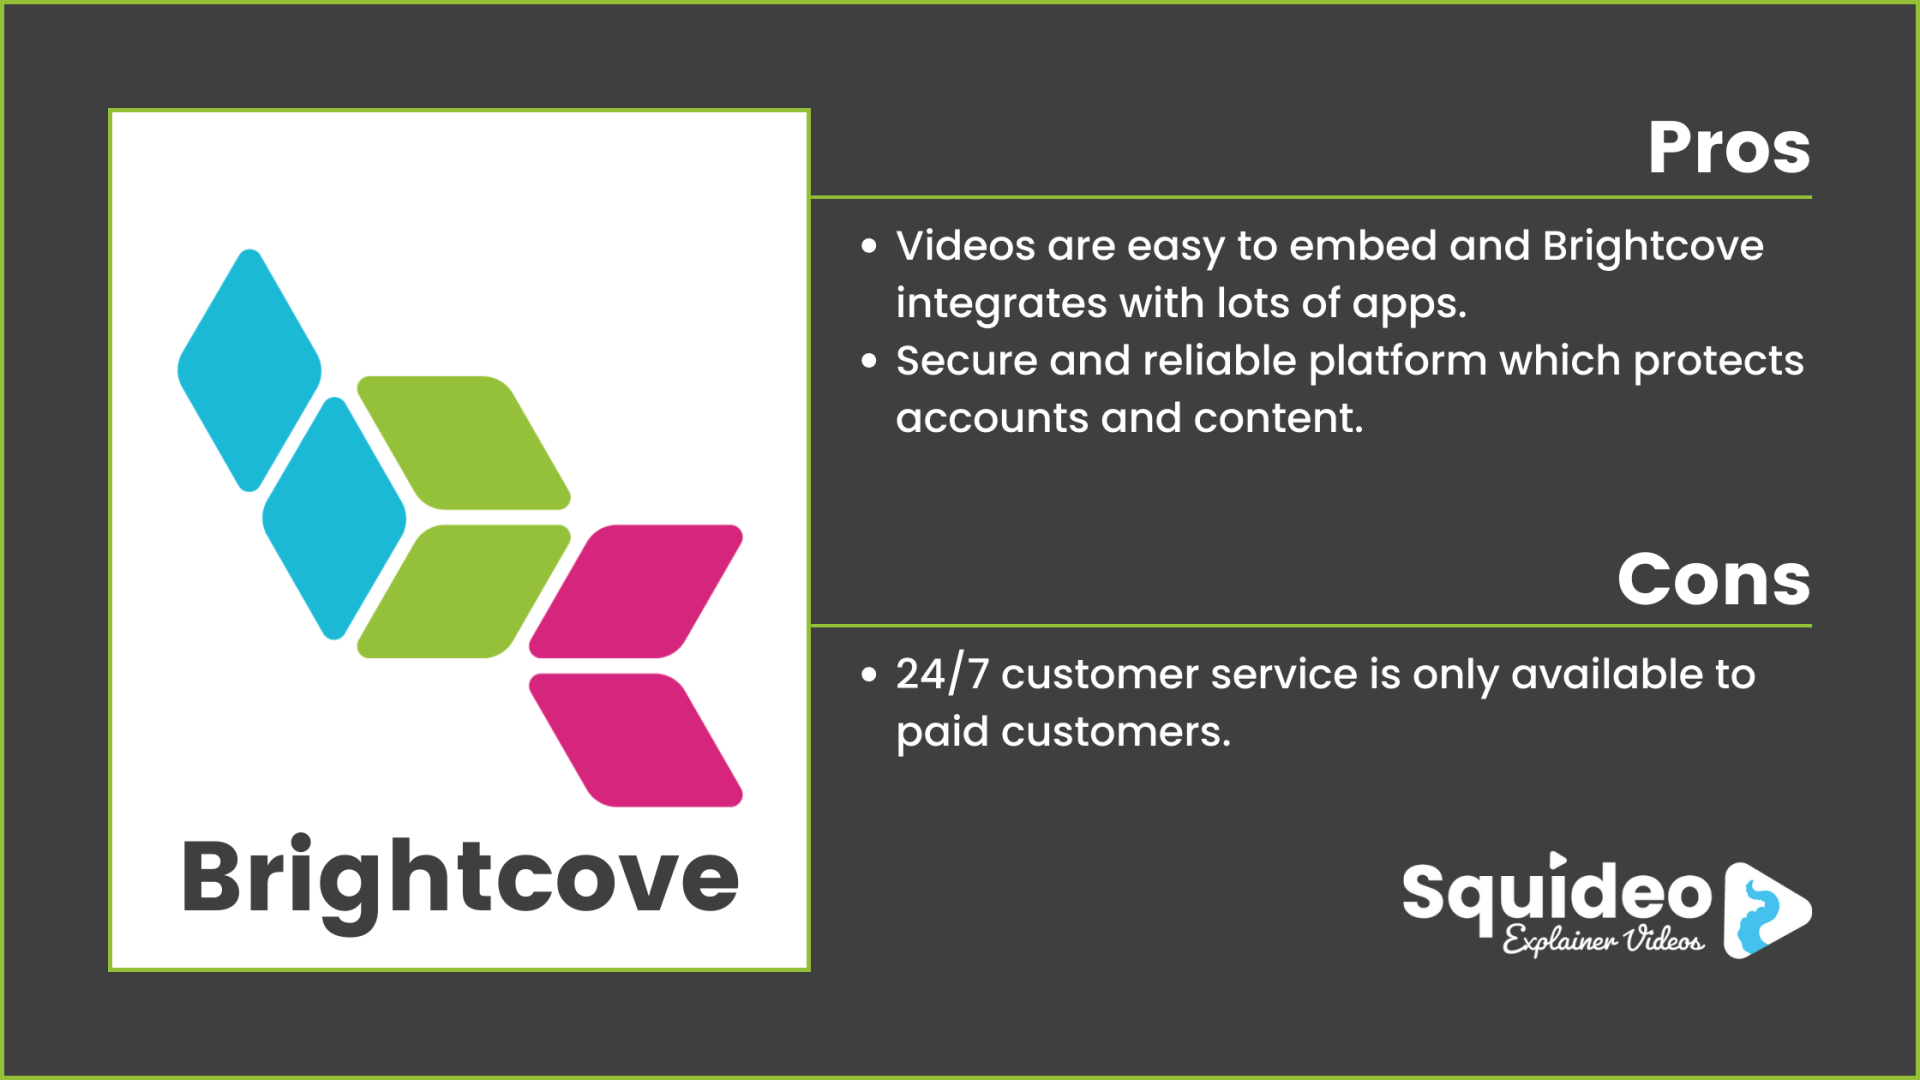 Brightcove Video Pros and Cons